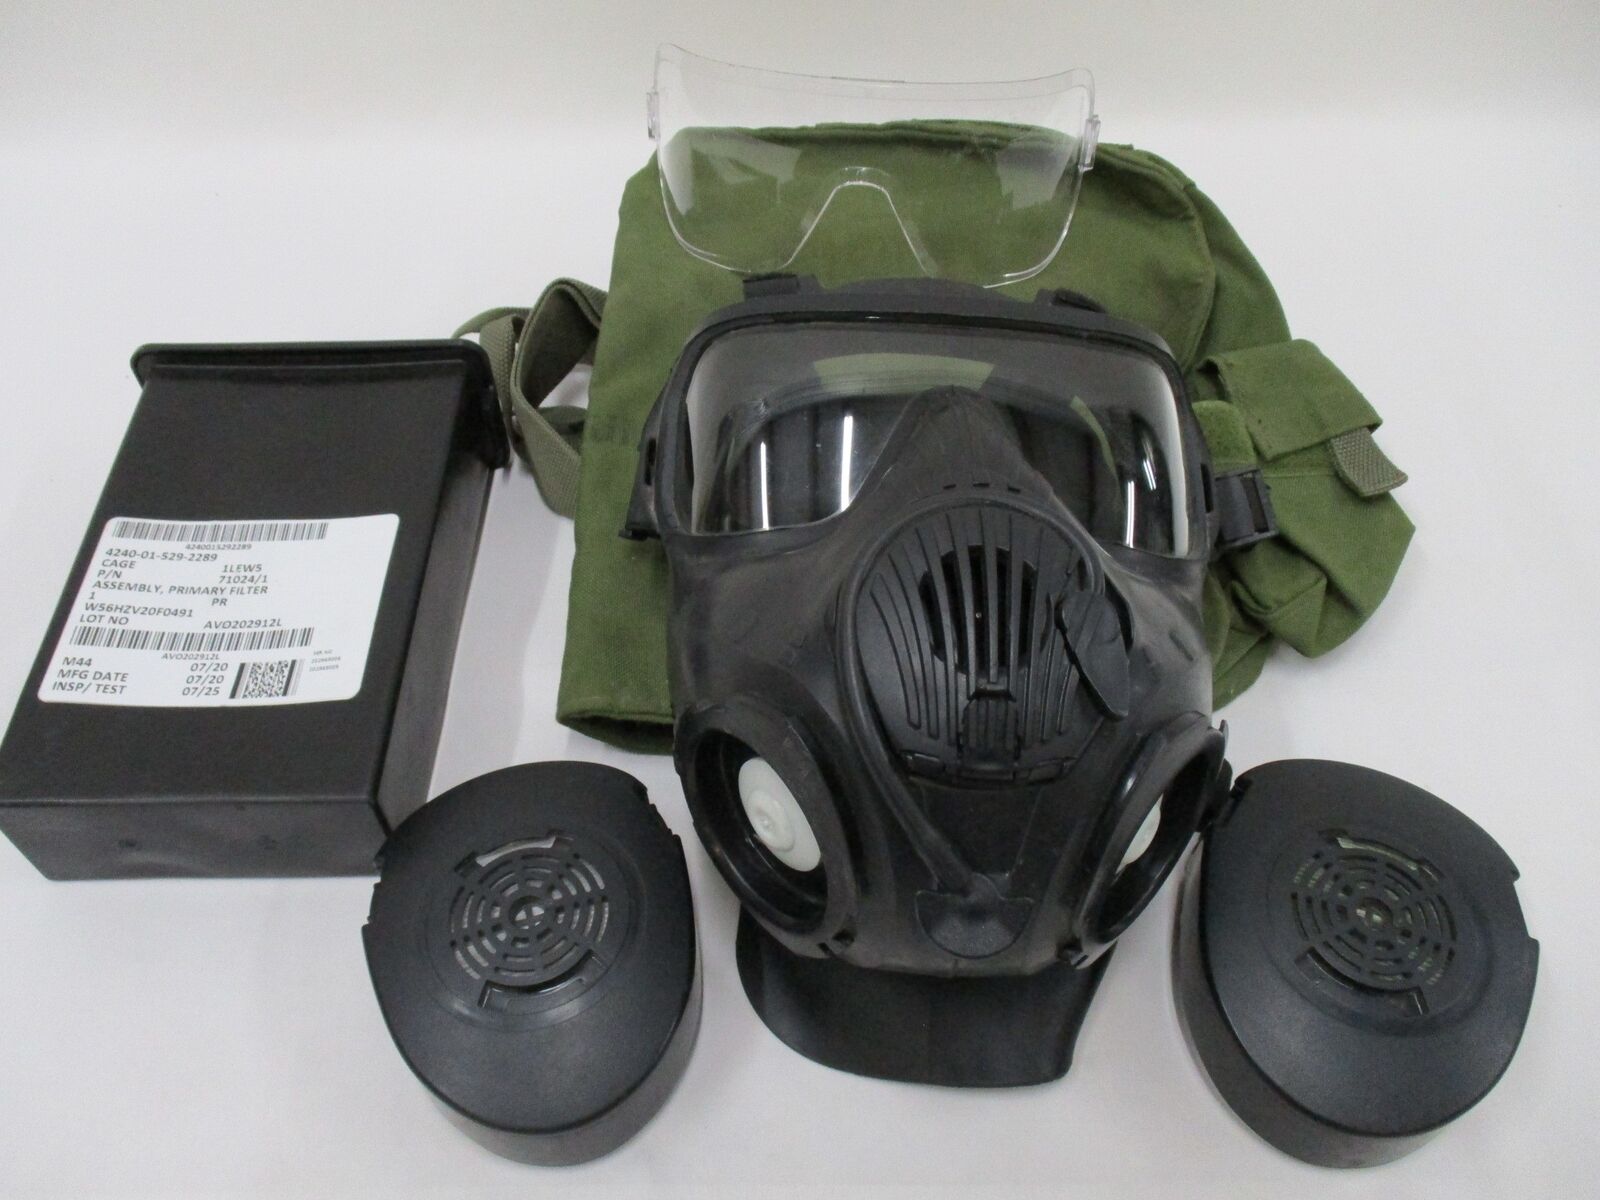 Avon M50 Gas Mask Full Face Respirator (With Bag) Filter NBC Protection LARGE